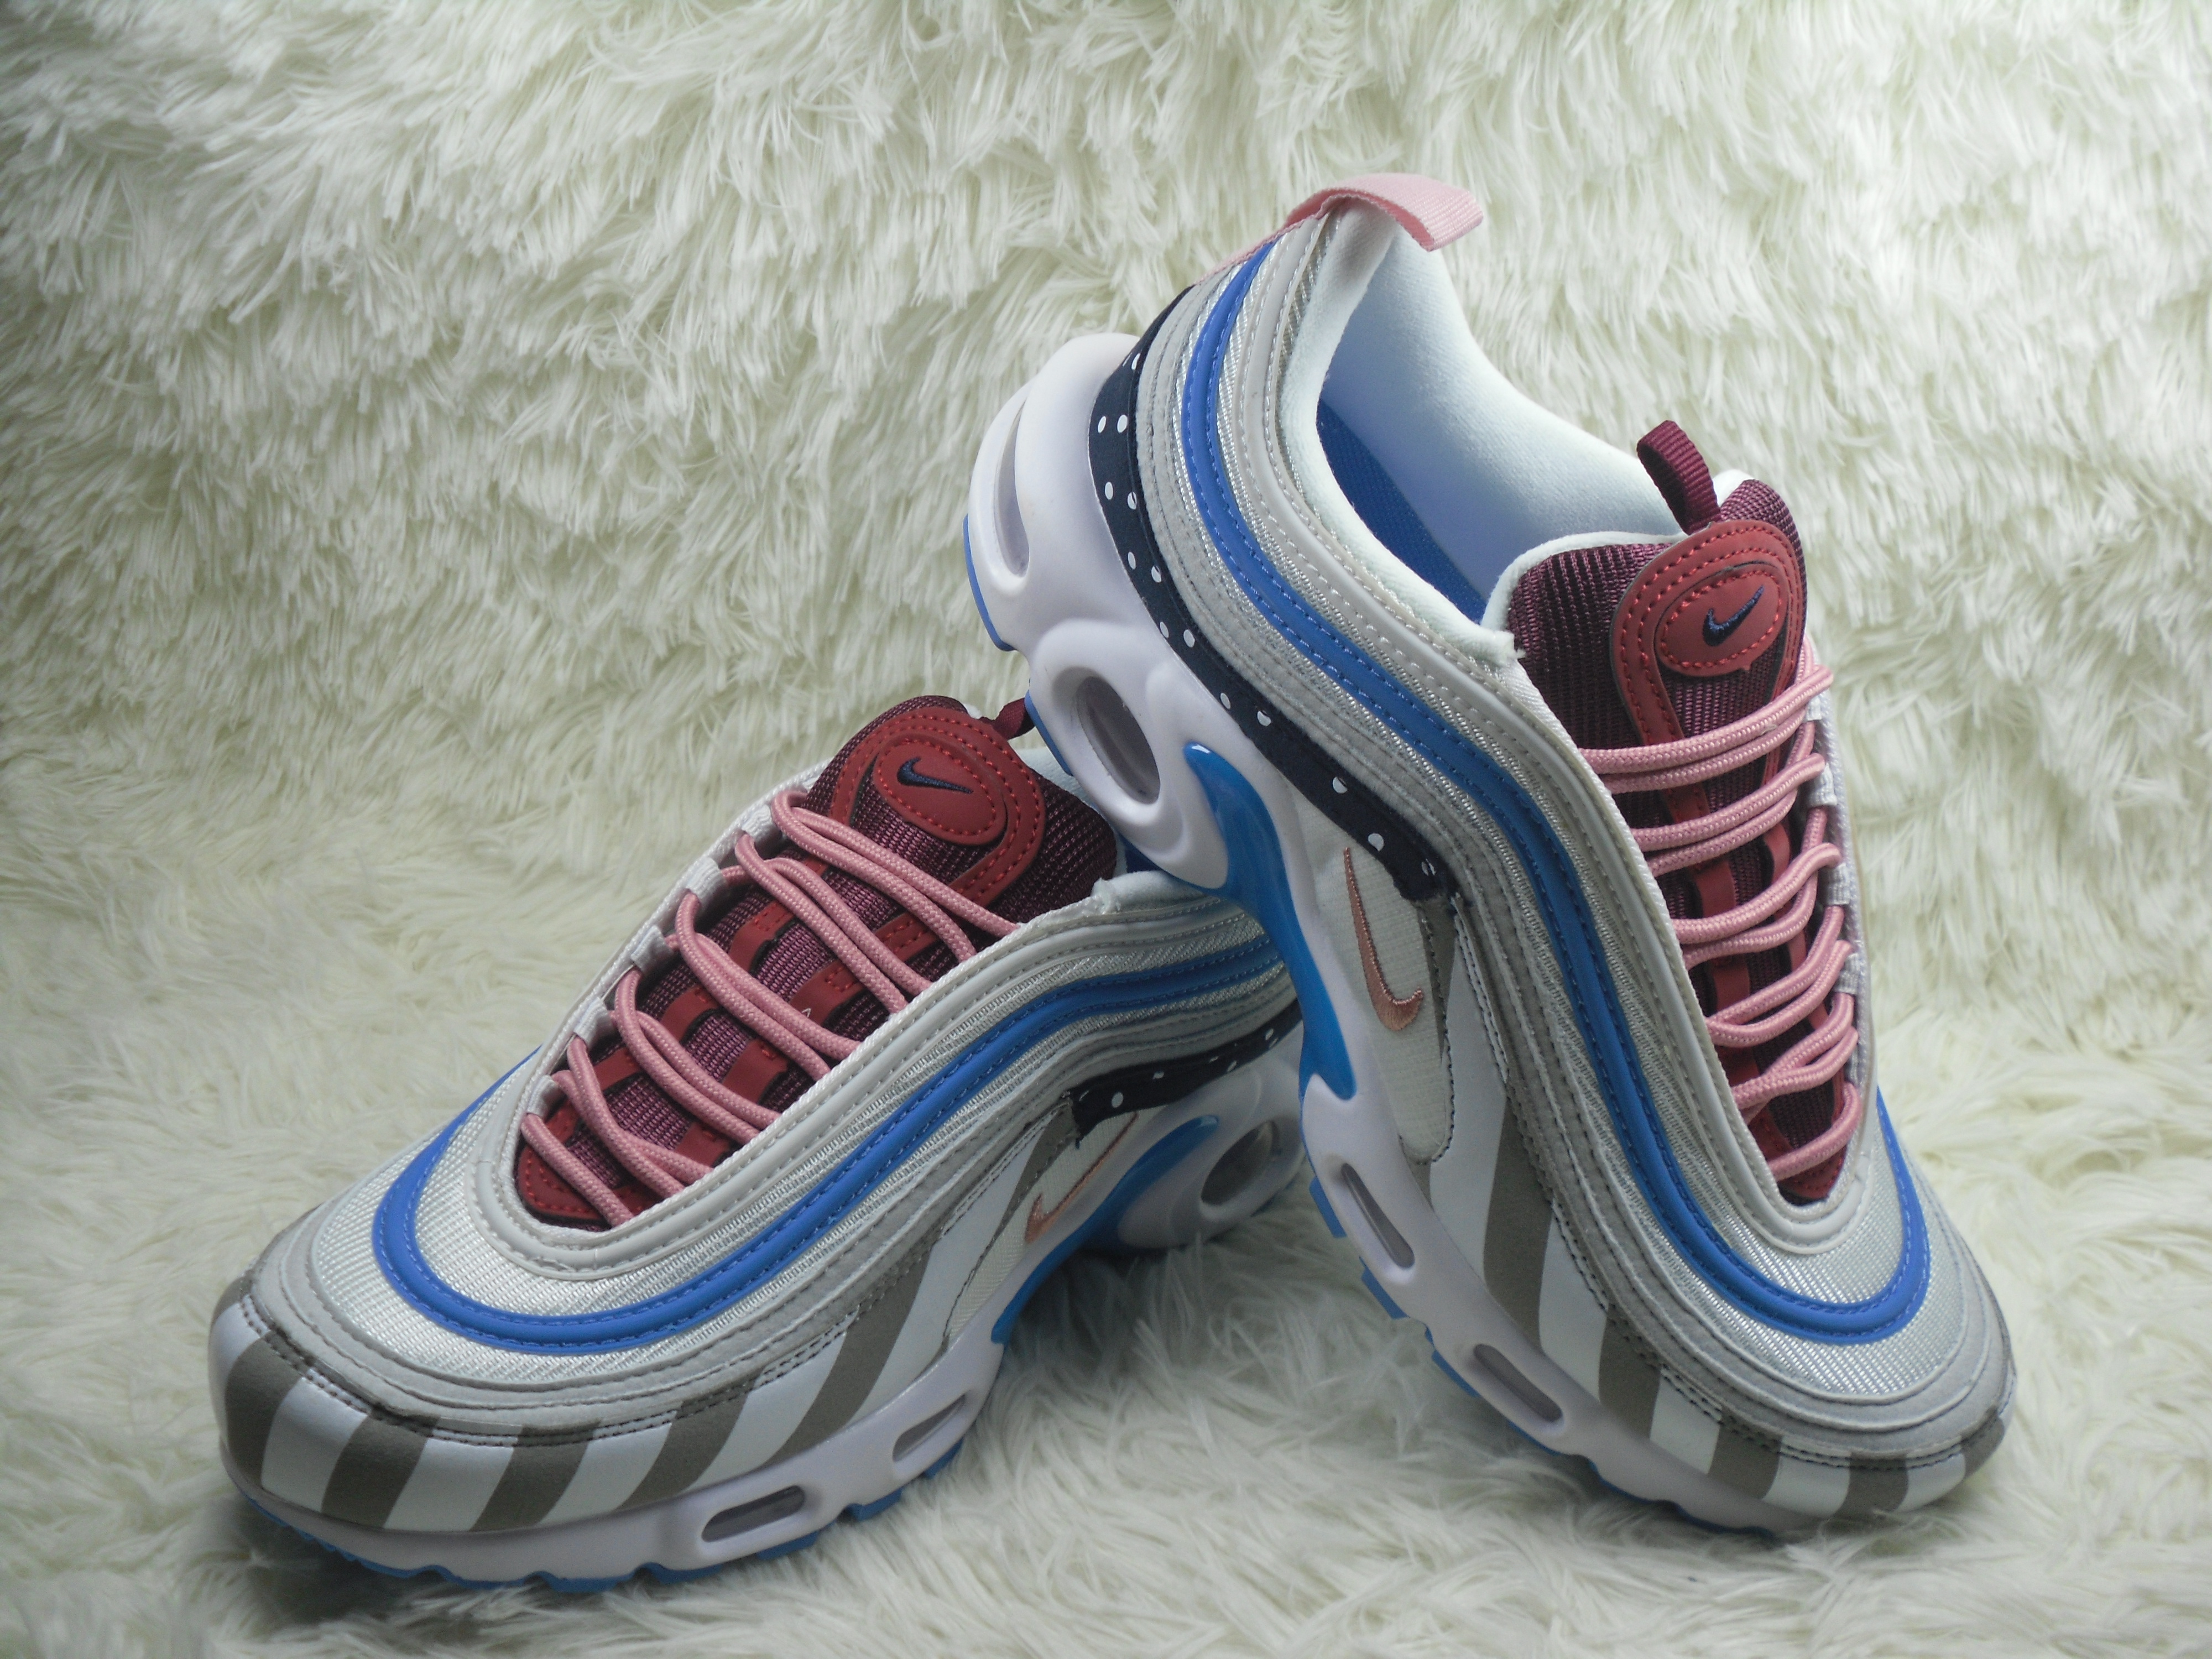 Nike Air Max TN 97 White Grey Blue Pink Shoes - Click Image to Close